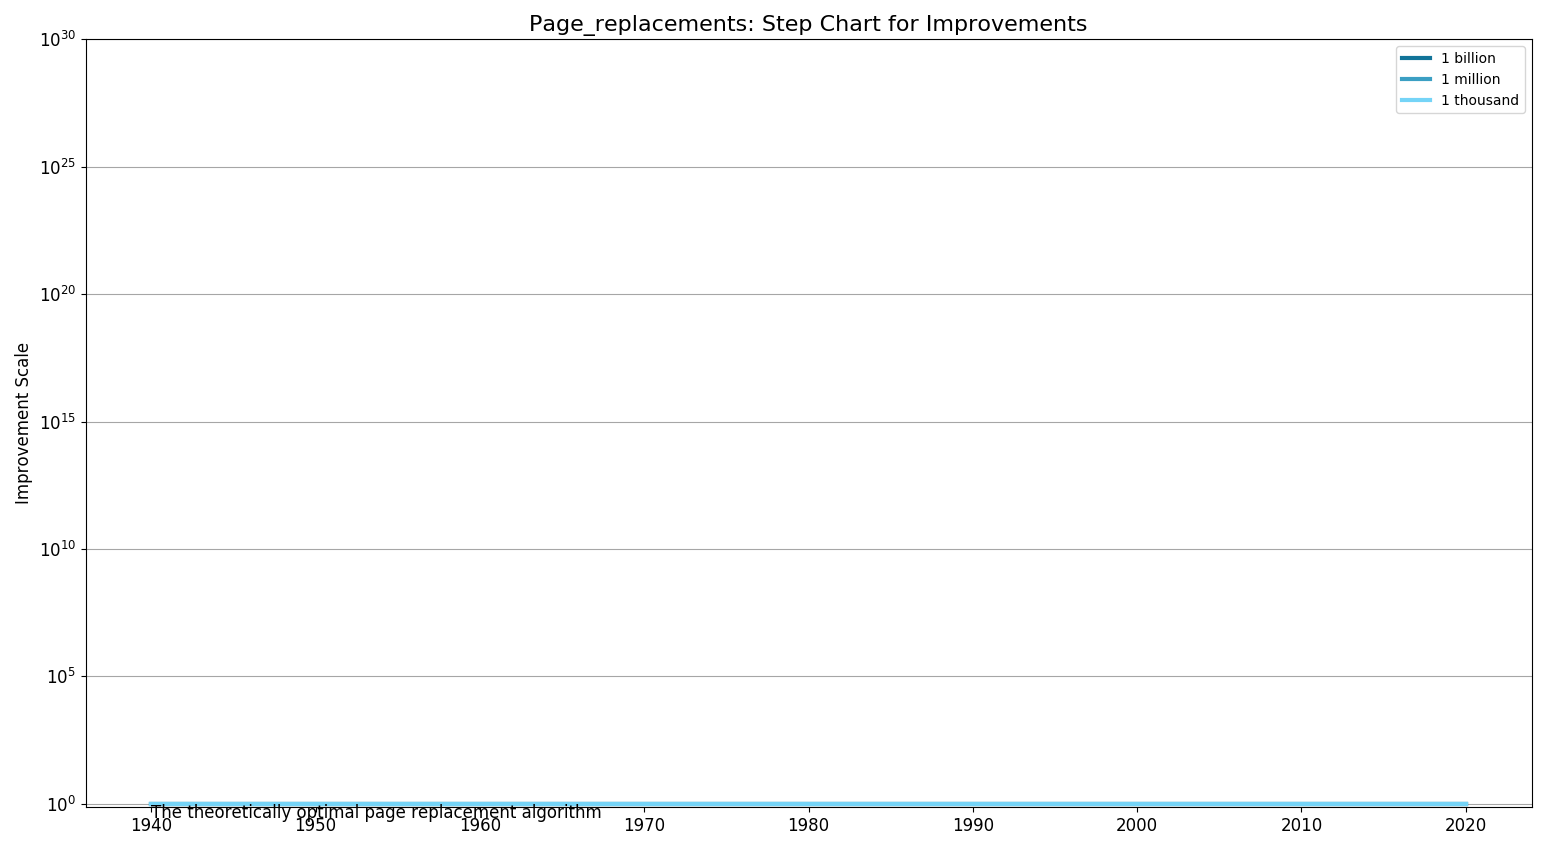 Page replacementsStepChart.png